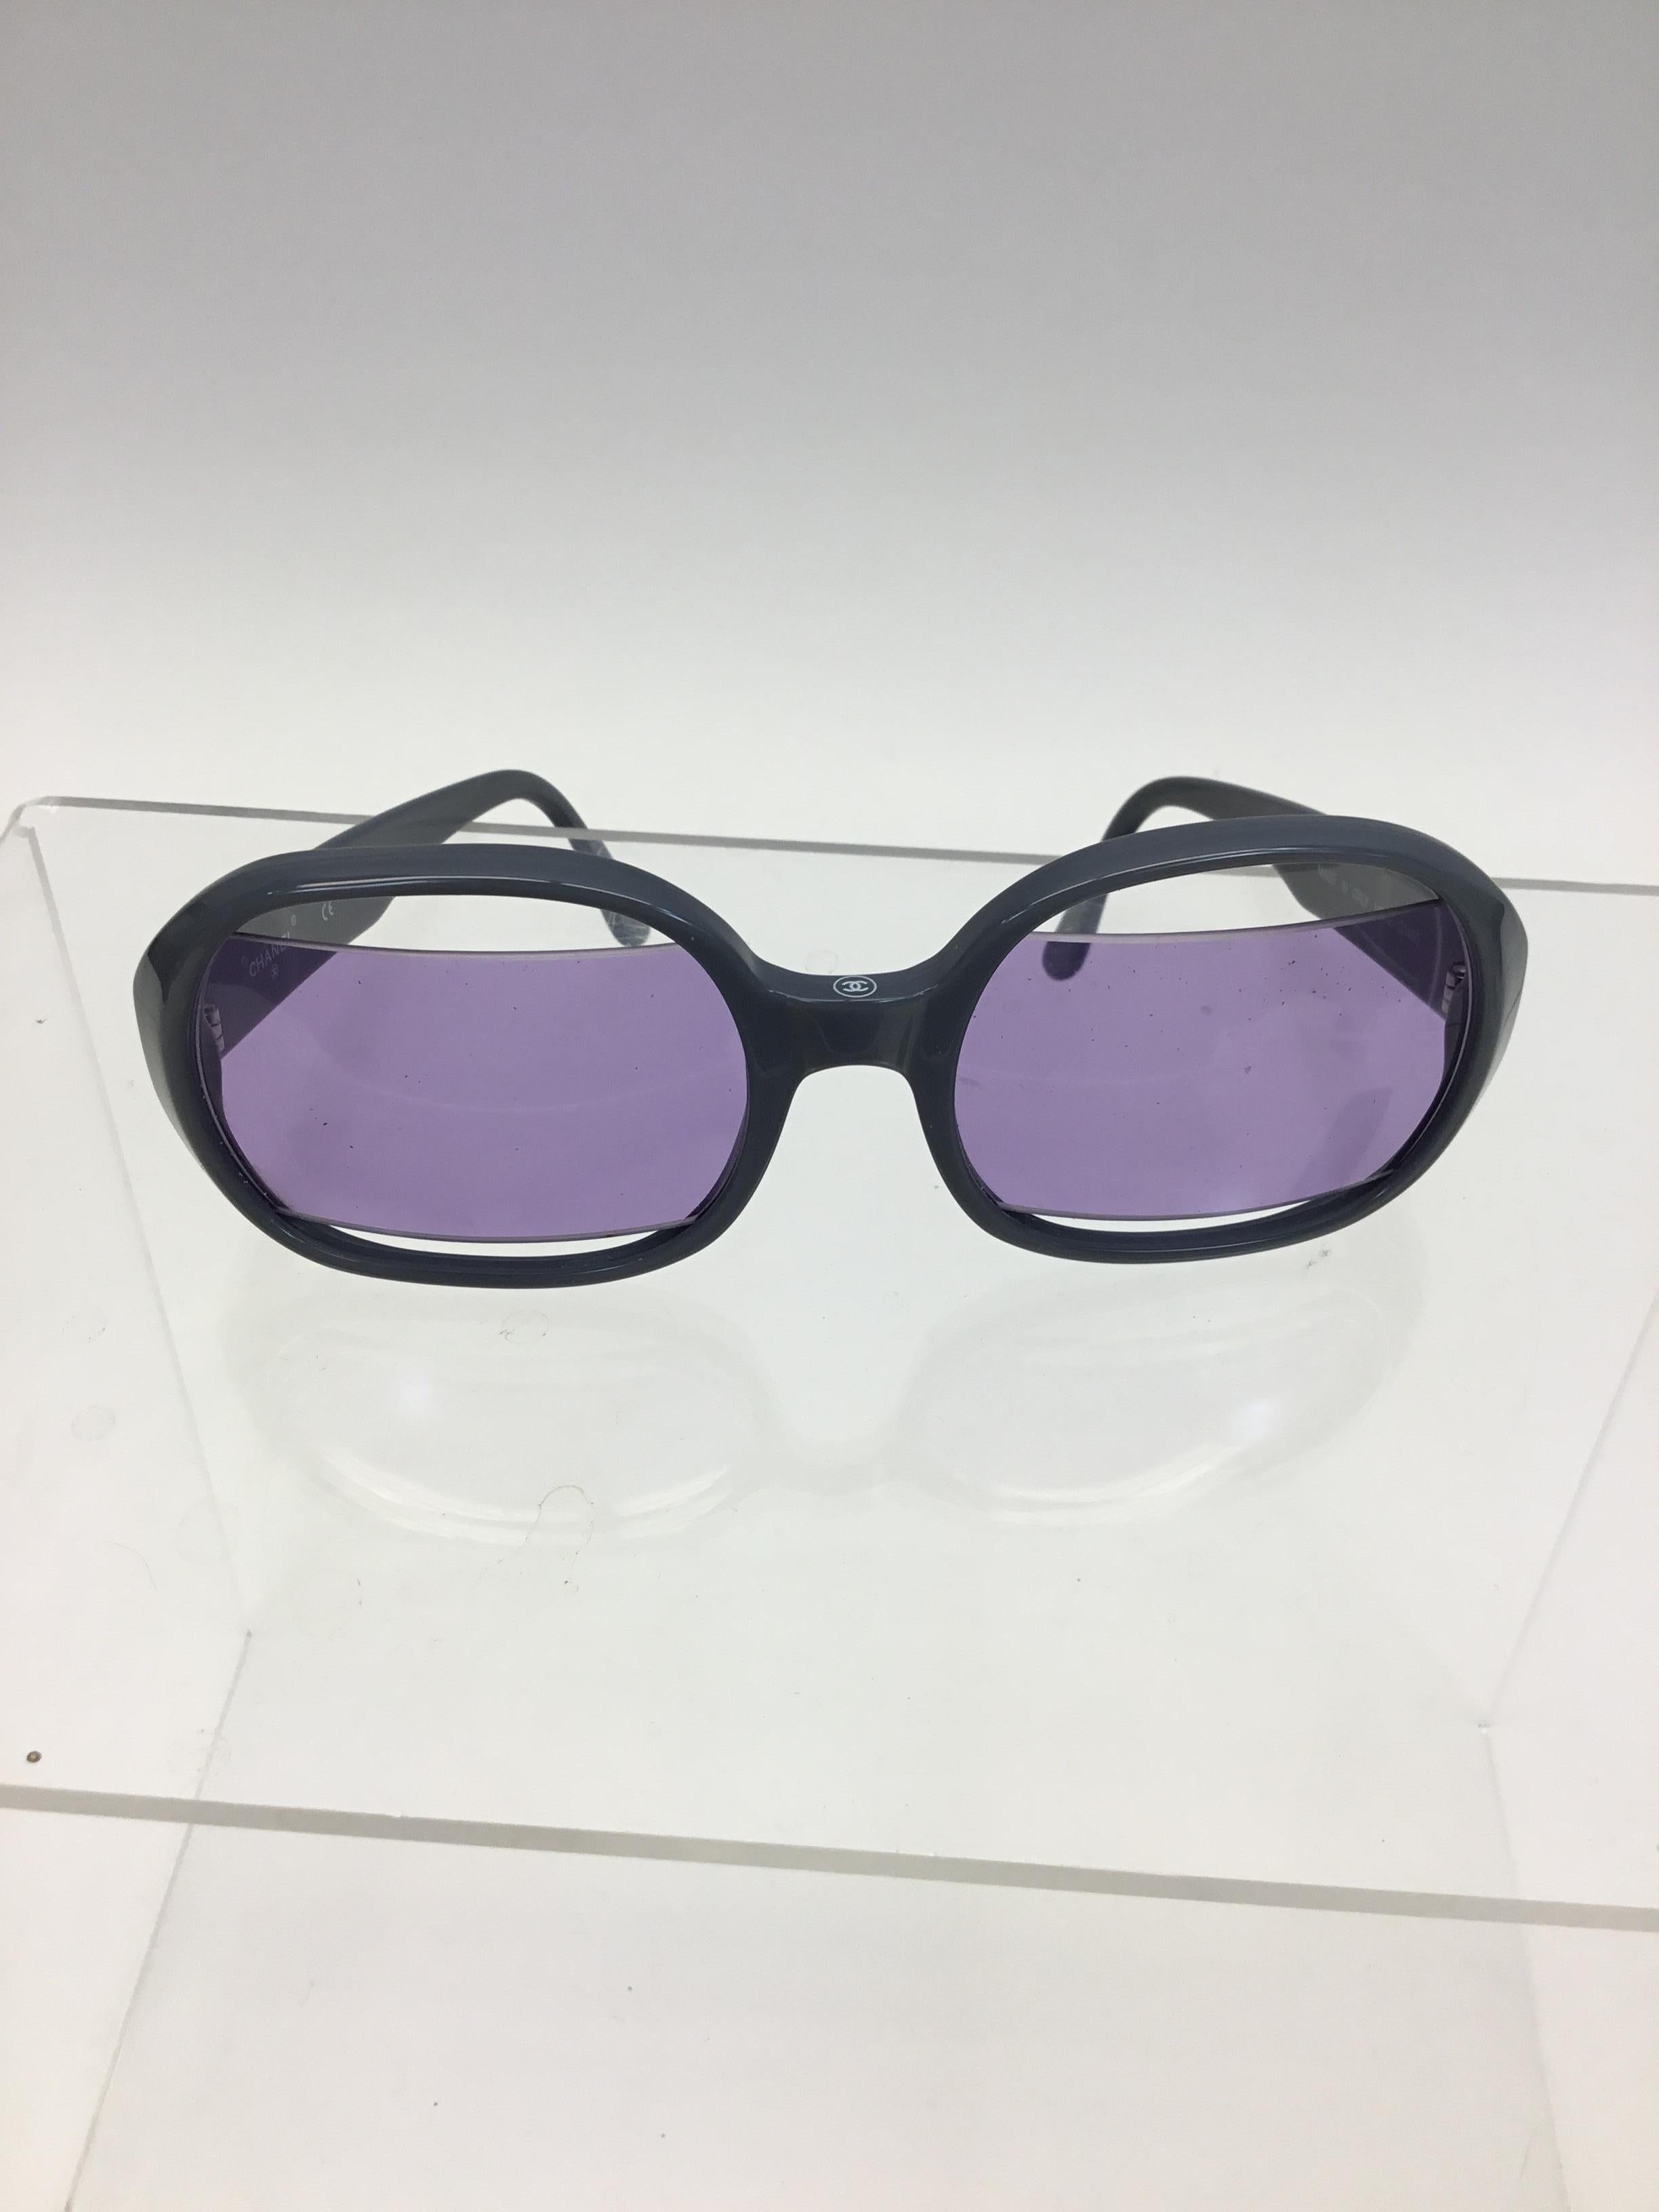 Chanel Light Blue Sunglasses with Purple Lenses
$250
Made in Italy
6” across
4.5” back
Comes with case